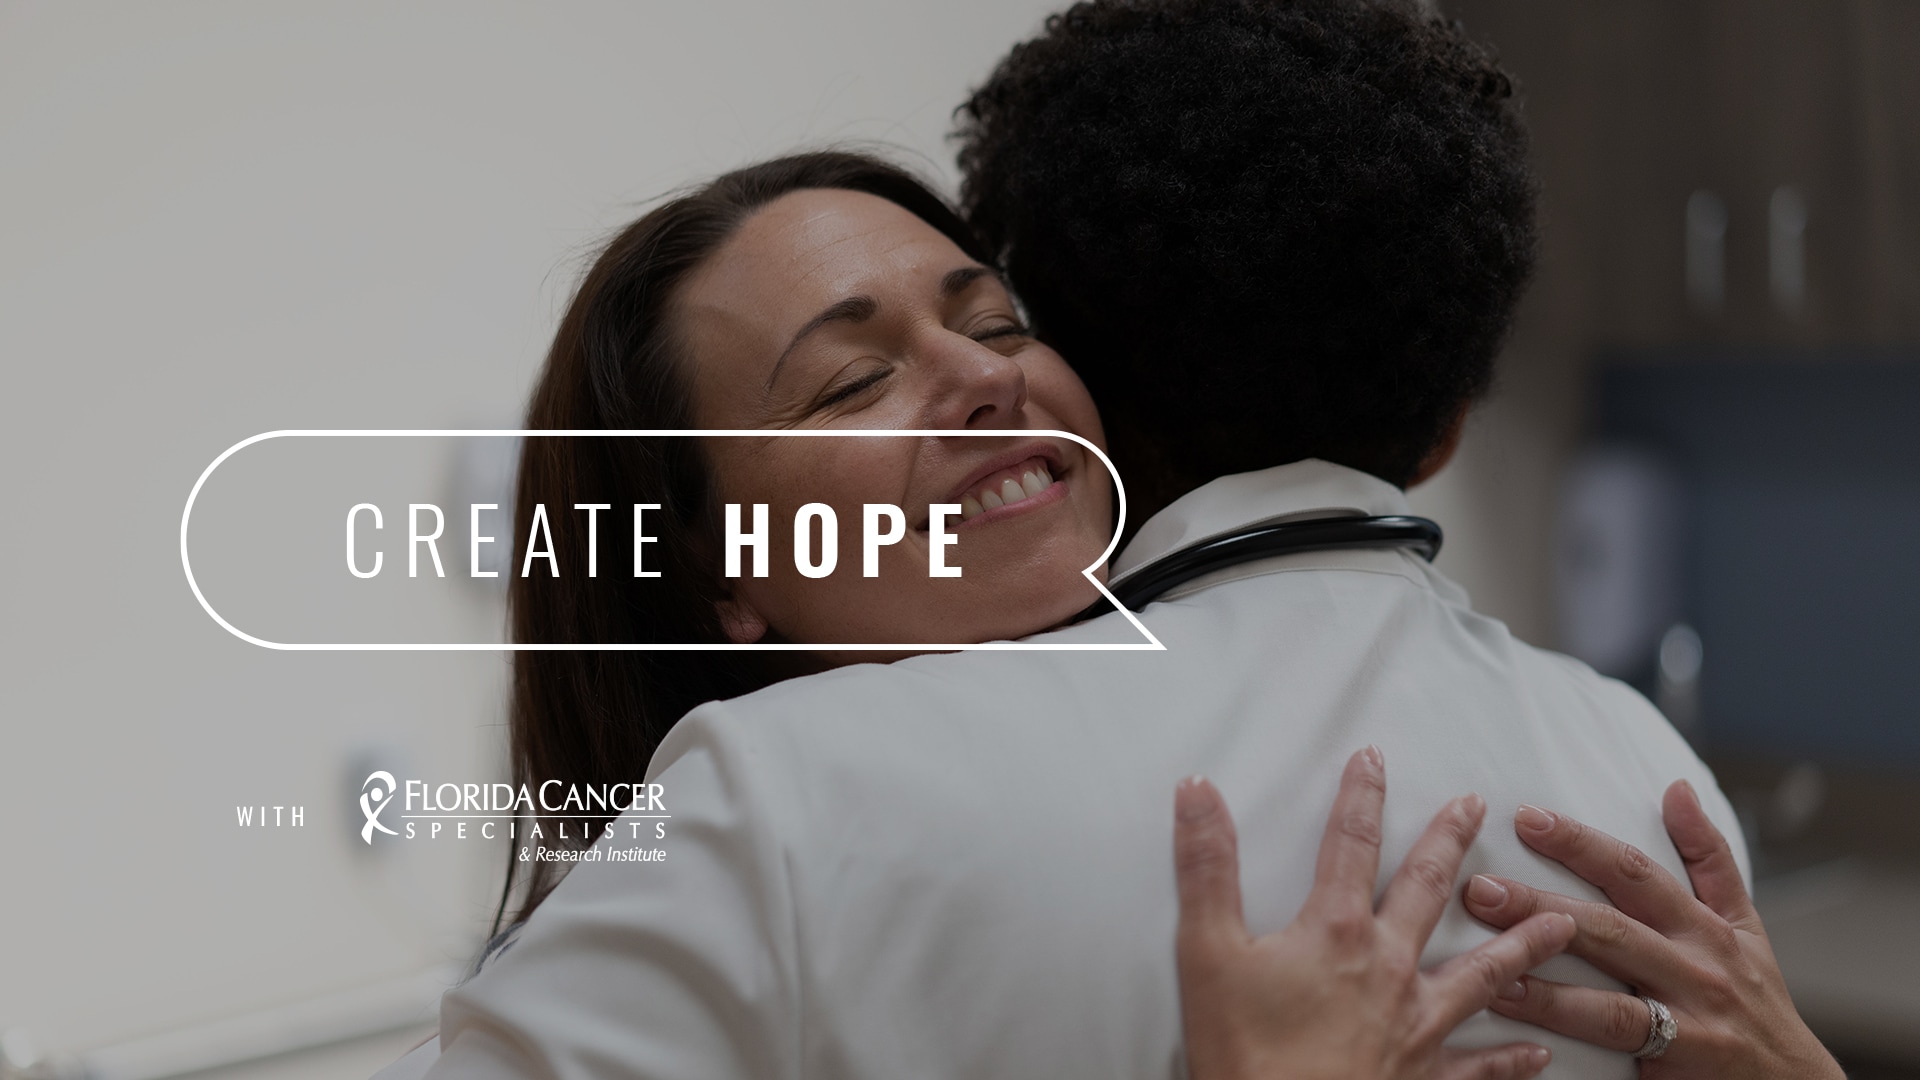 Create Hope with Florida Cancer Specialists